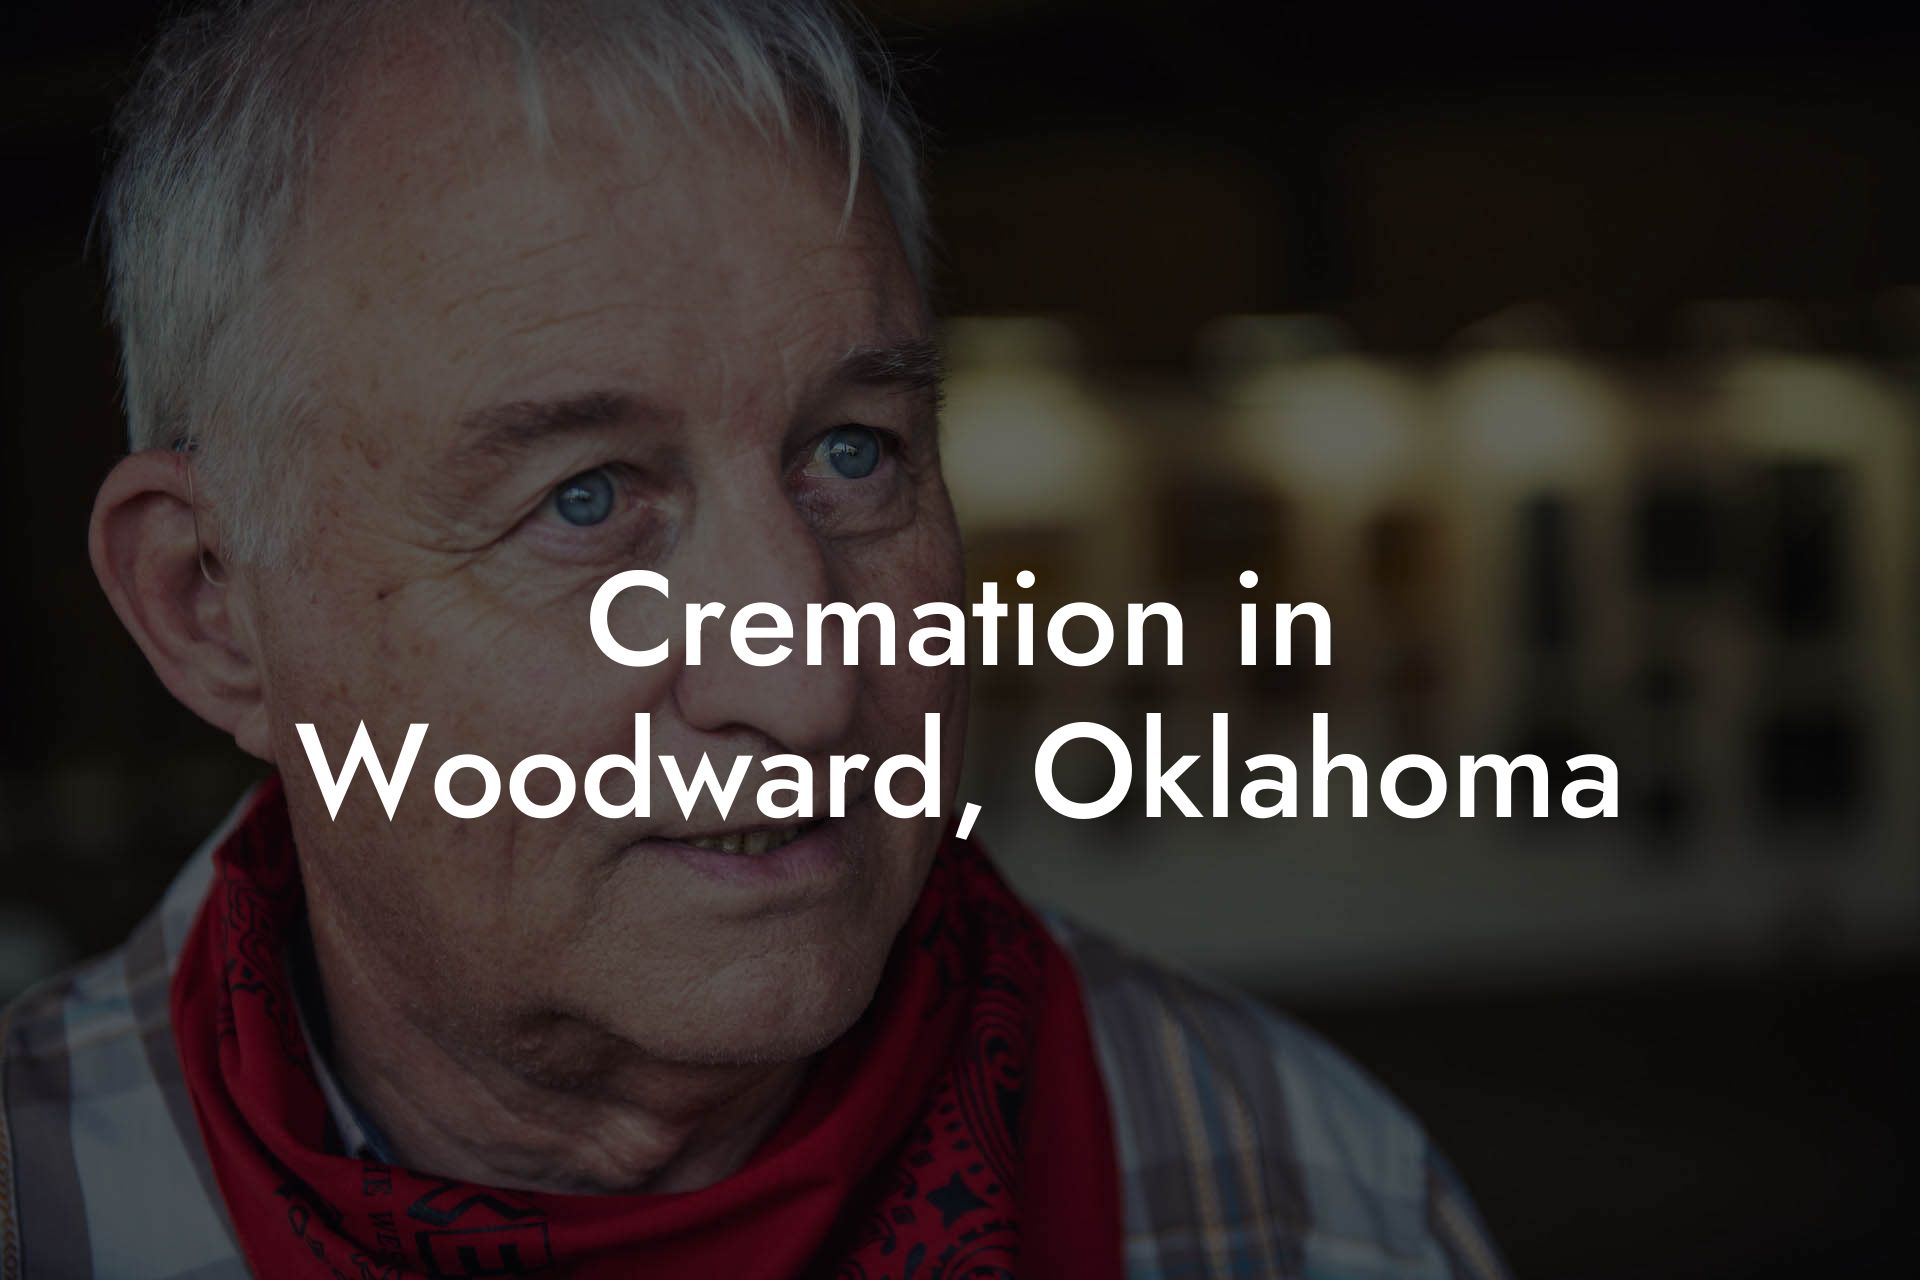 Cremation in Woodward, Oklahoma